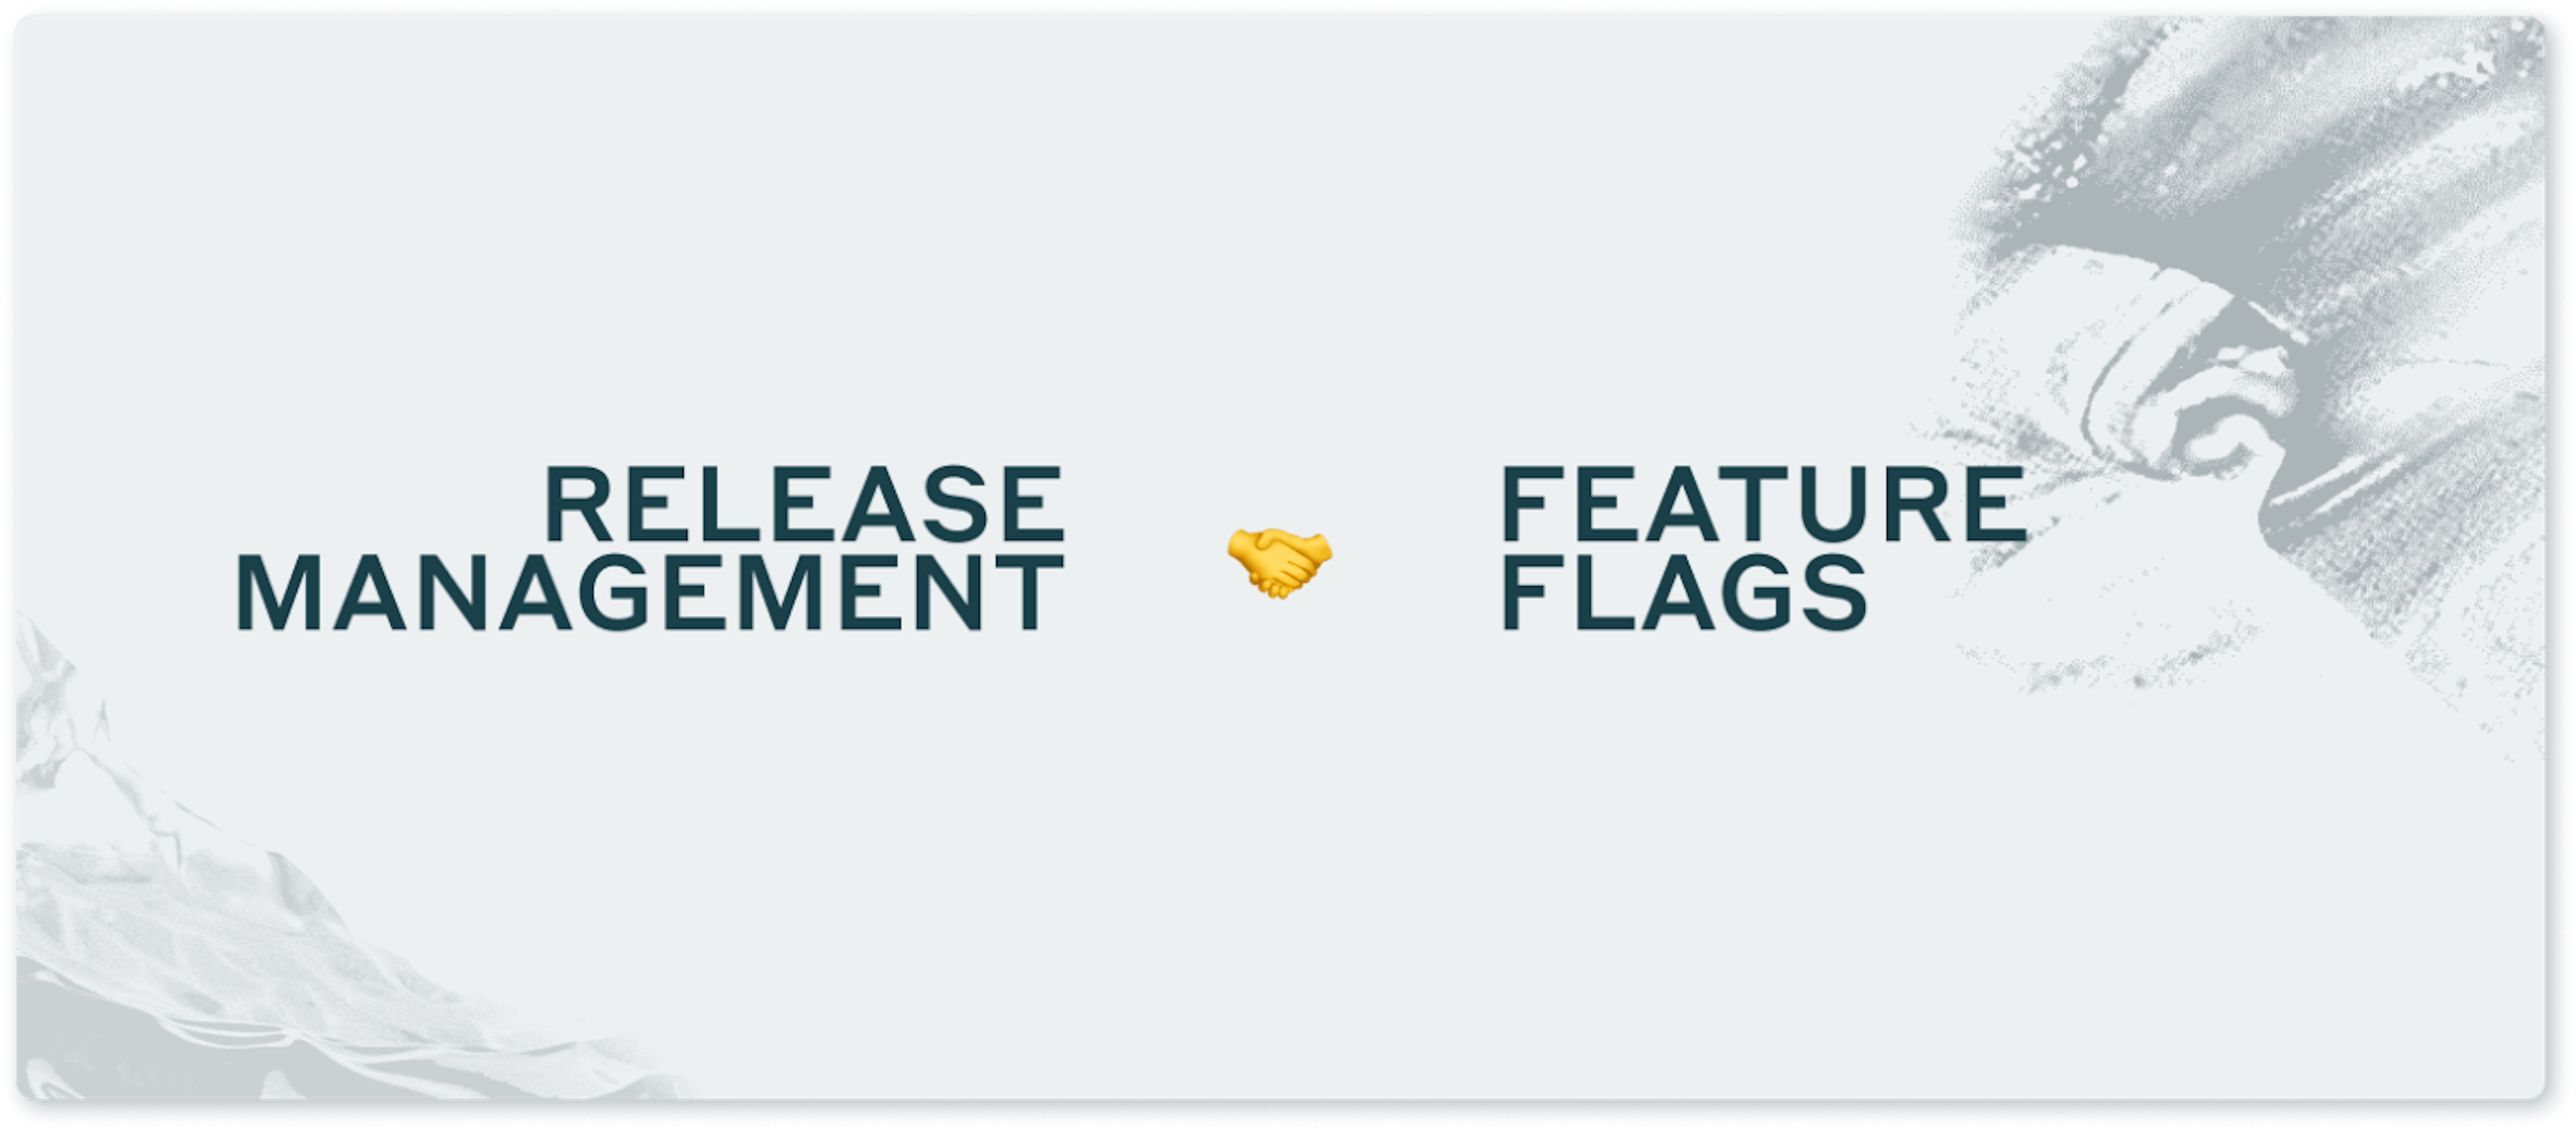 featured image - We Need to Talk About Feature Flags in Release Management